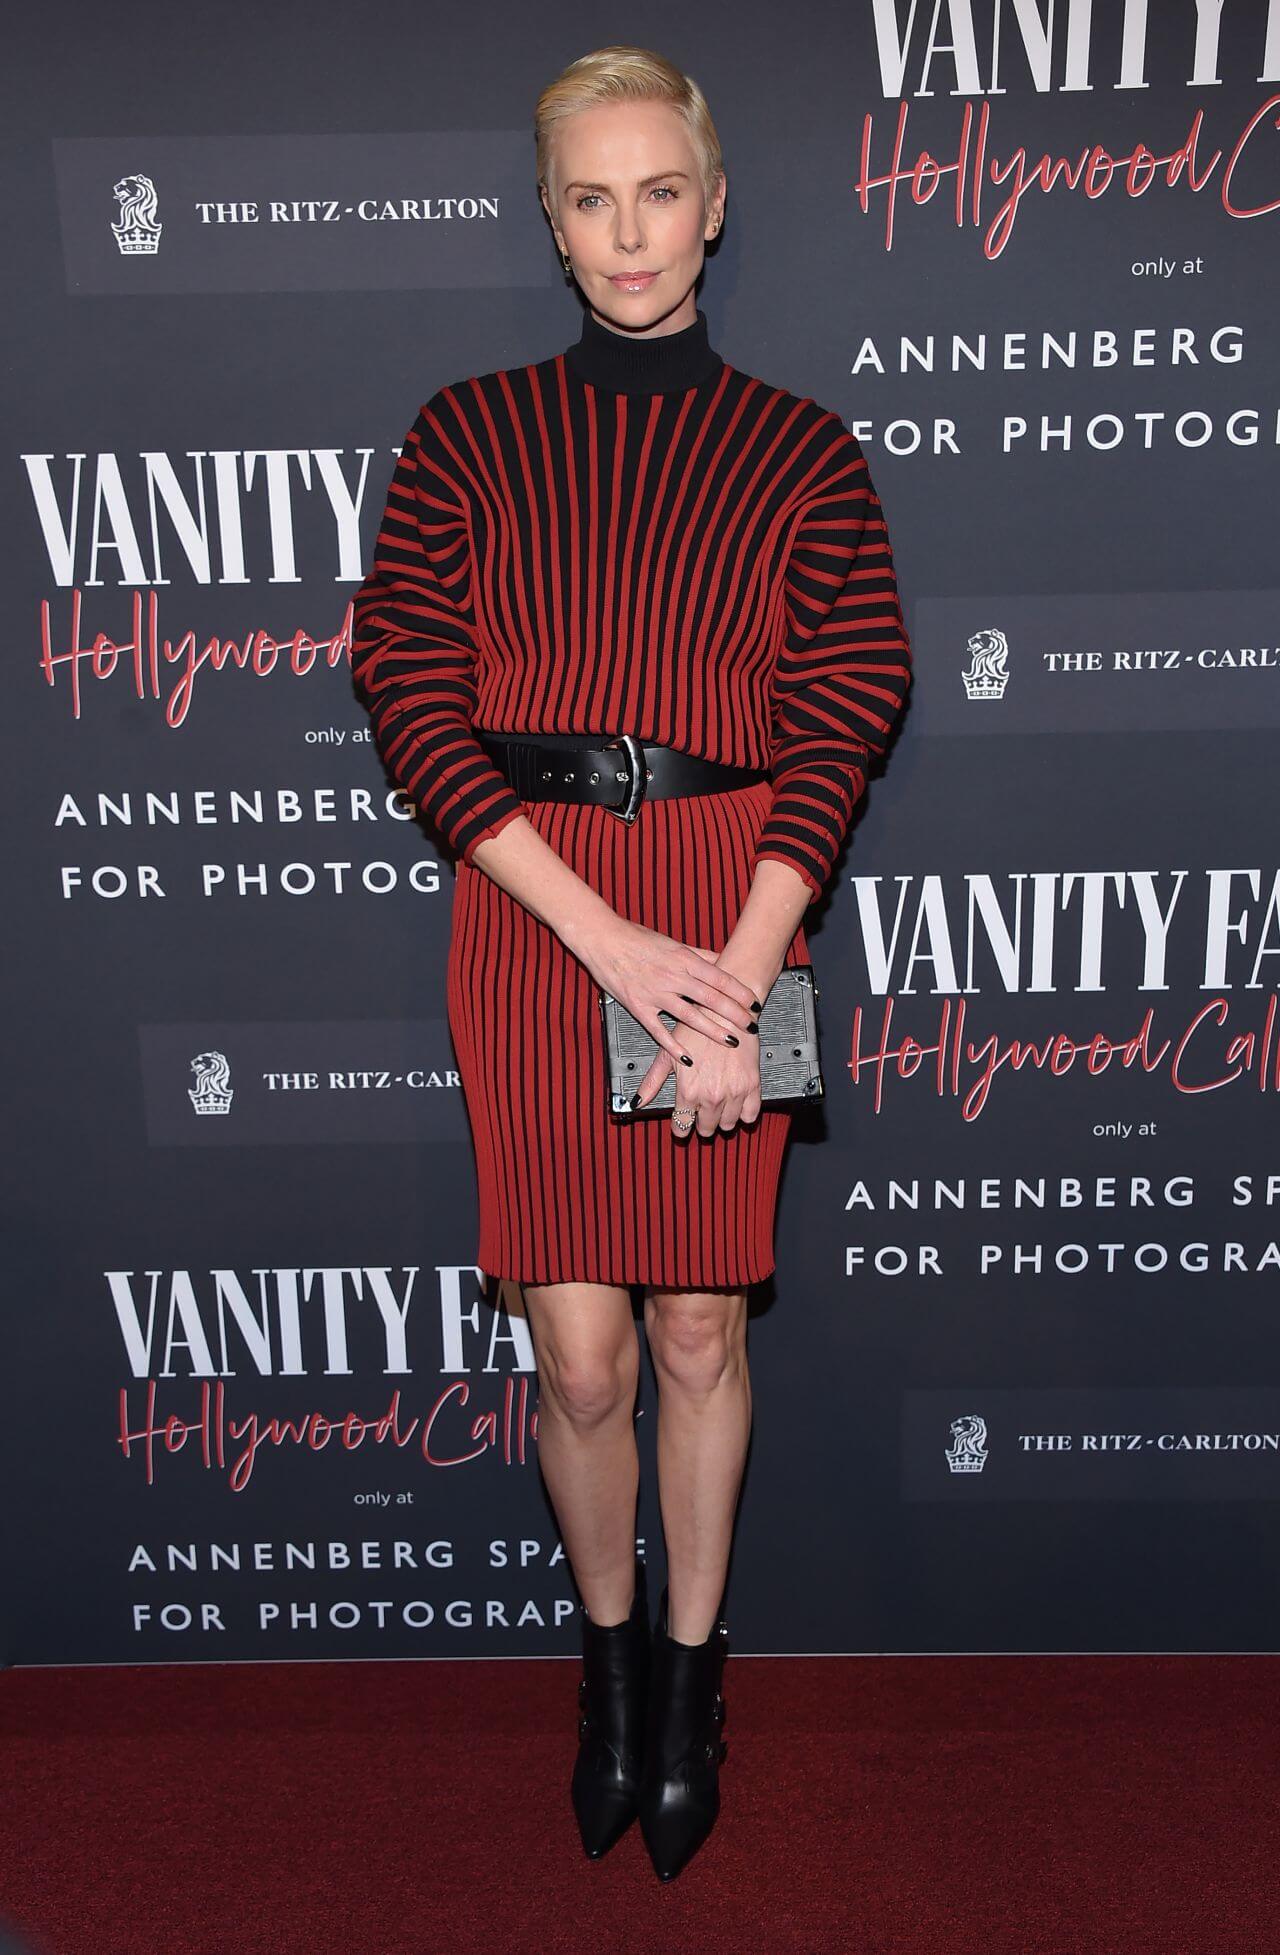 Charlize Theron  In Red Striped Full Sleeves Short Dress At“Vanity Fair: Hollywood Calling” Exhibition LA